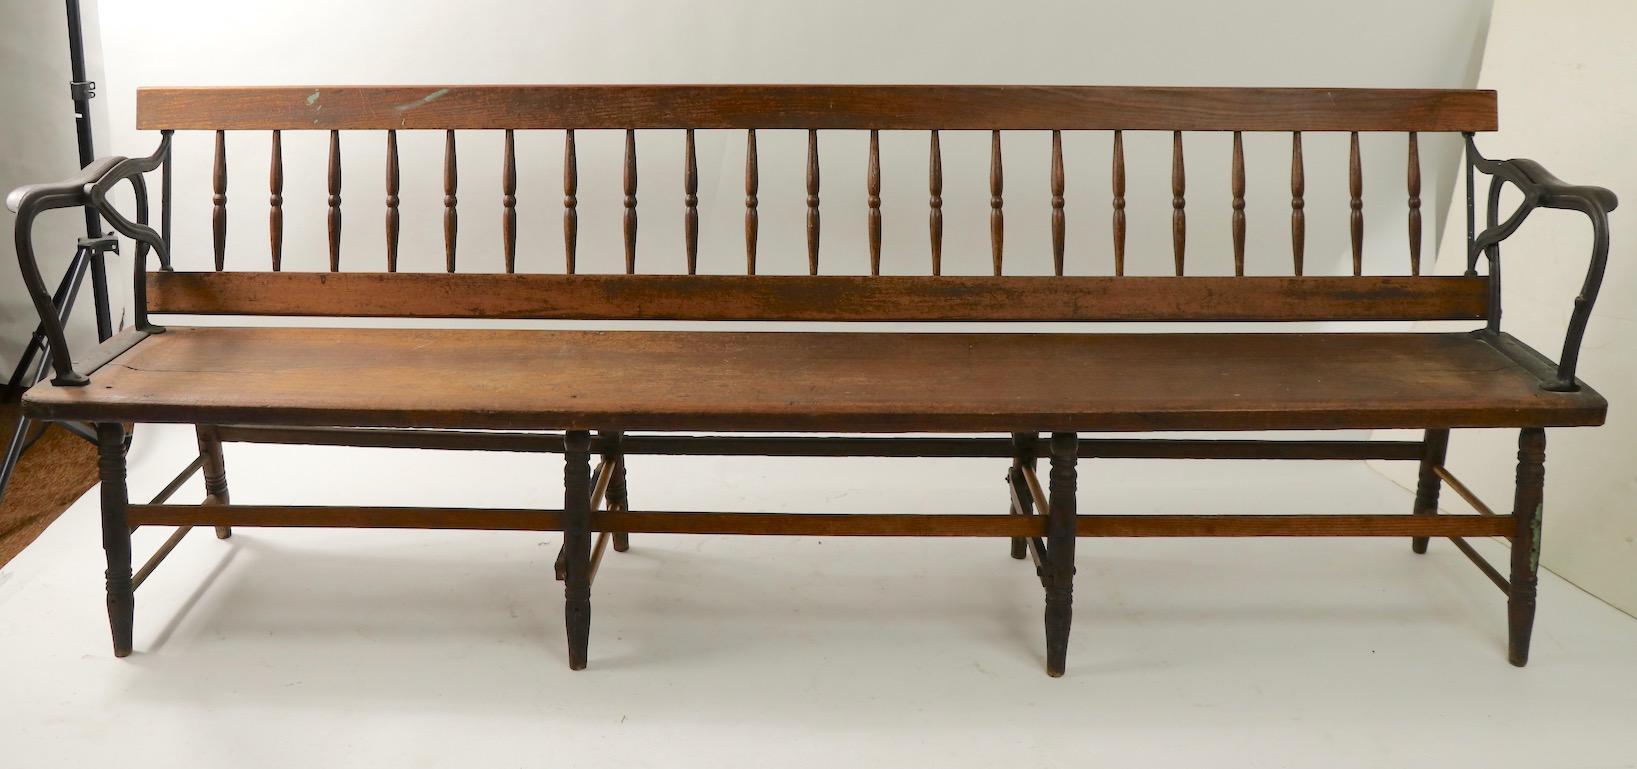 American  Industrial Victorian Reversible Train Station Bench